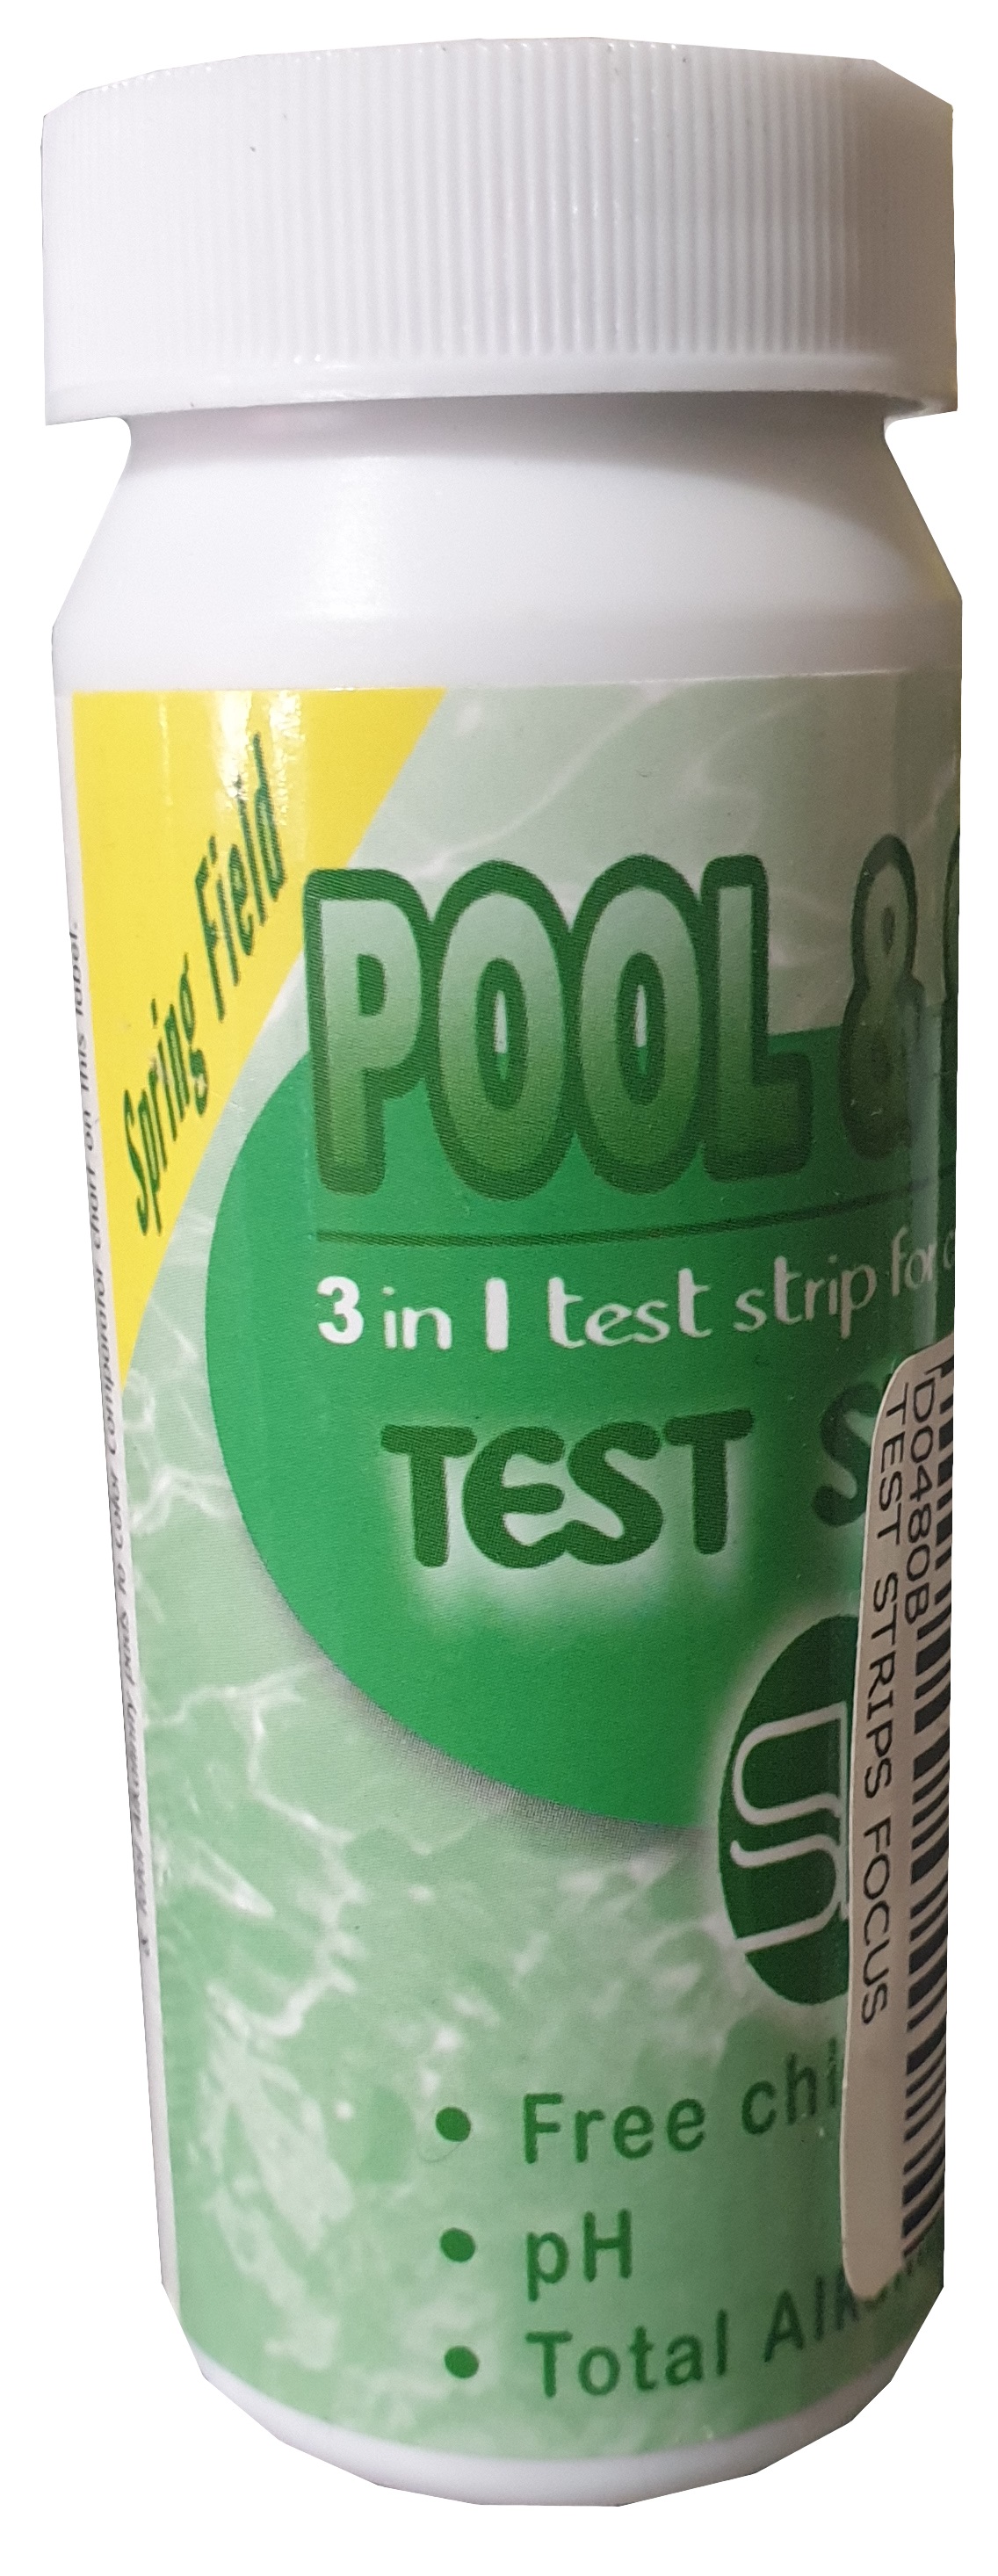 Springfield Pool & Spa 3 in 1 Test Strips